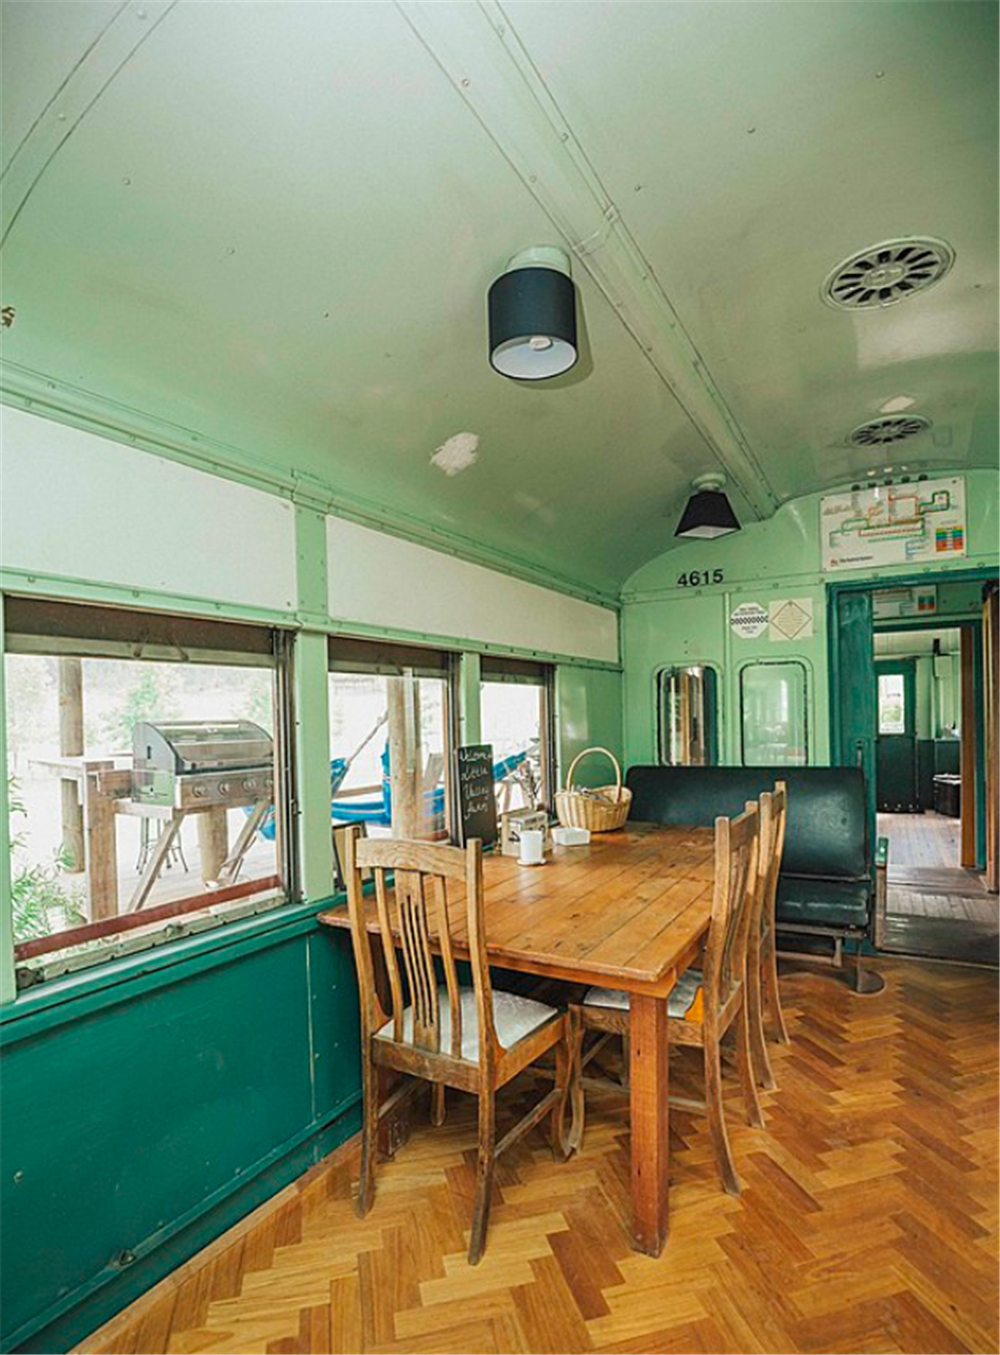 The couple recycle the abandoned 1950's train carriage, turning it into a 70-square-meter house, living with camels and nature: Amazing!  - Photo 6.